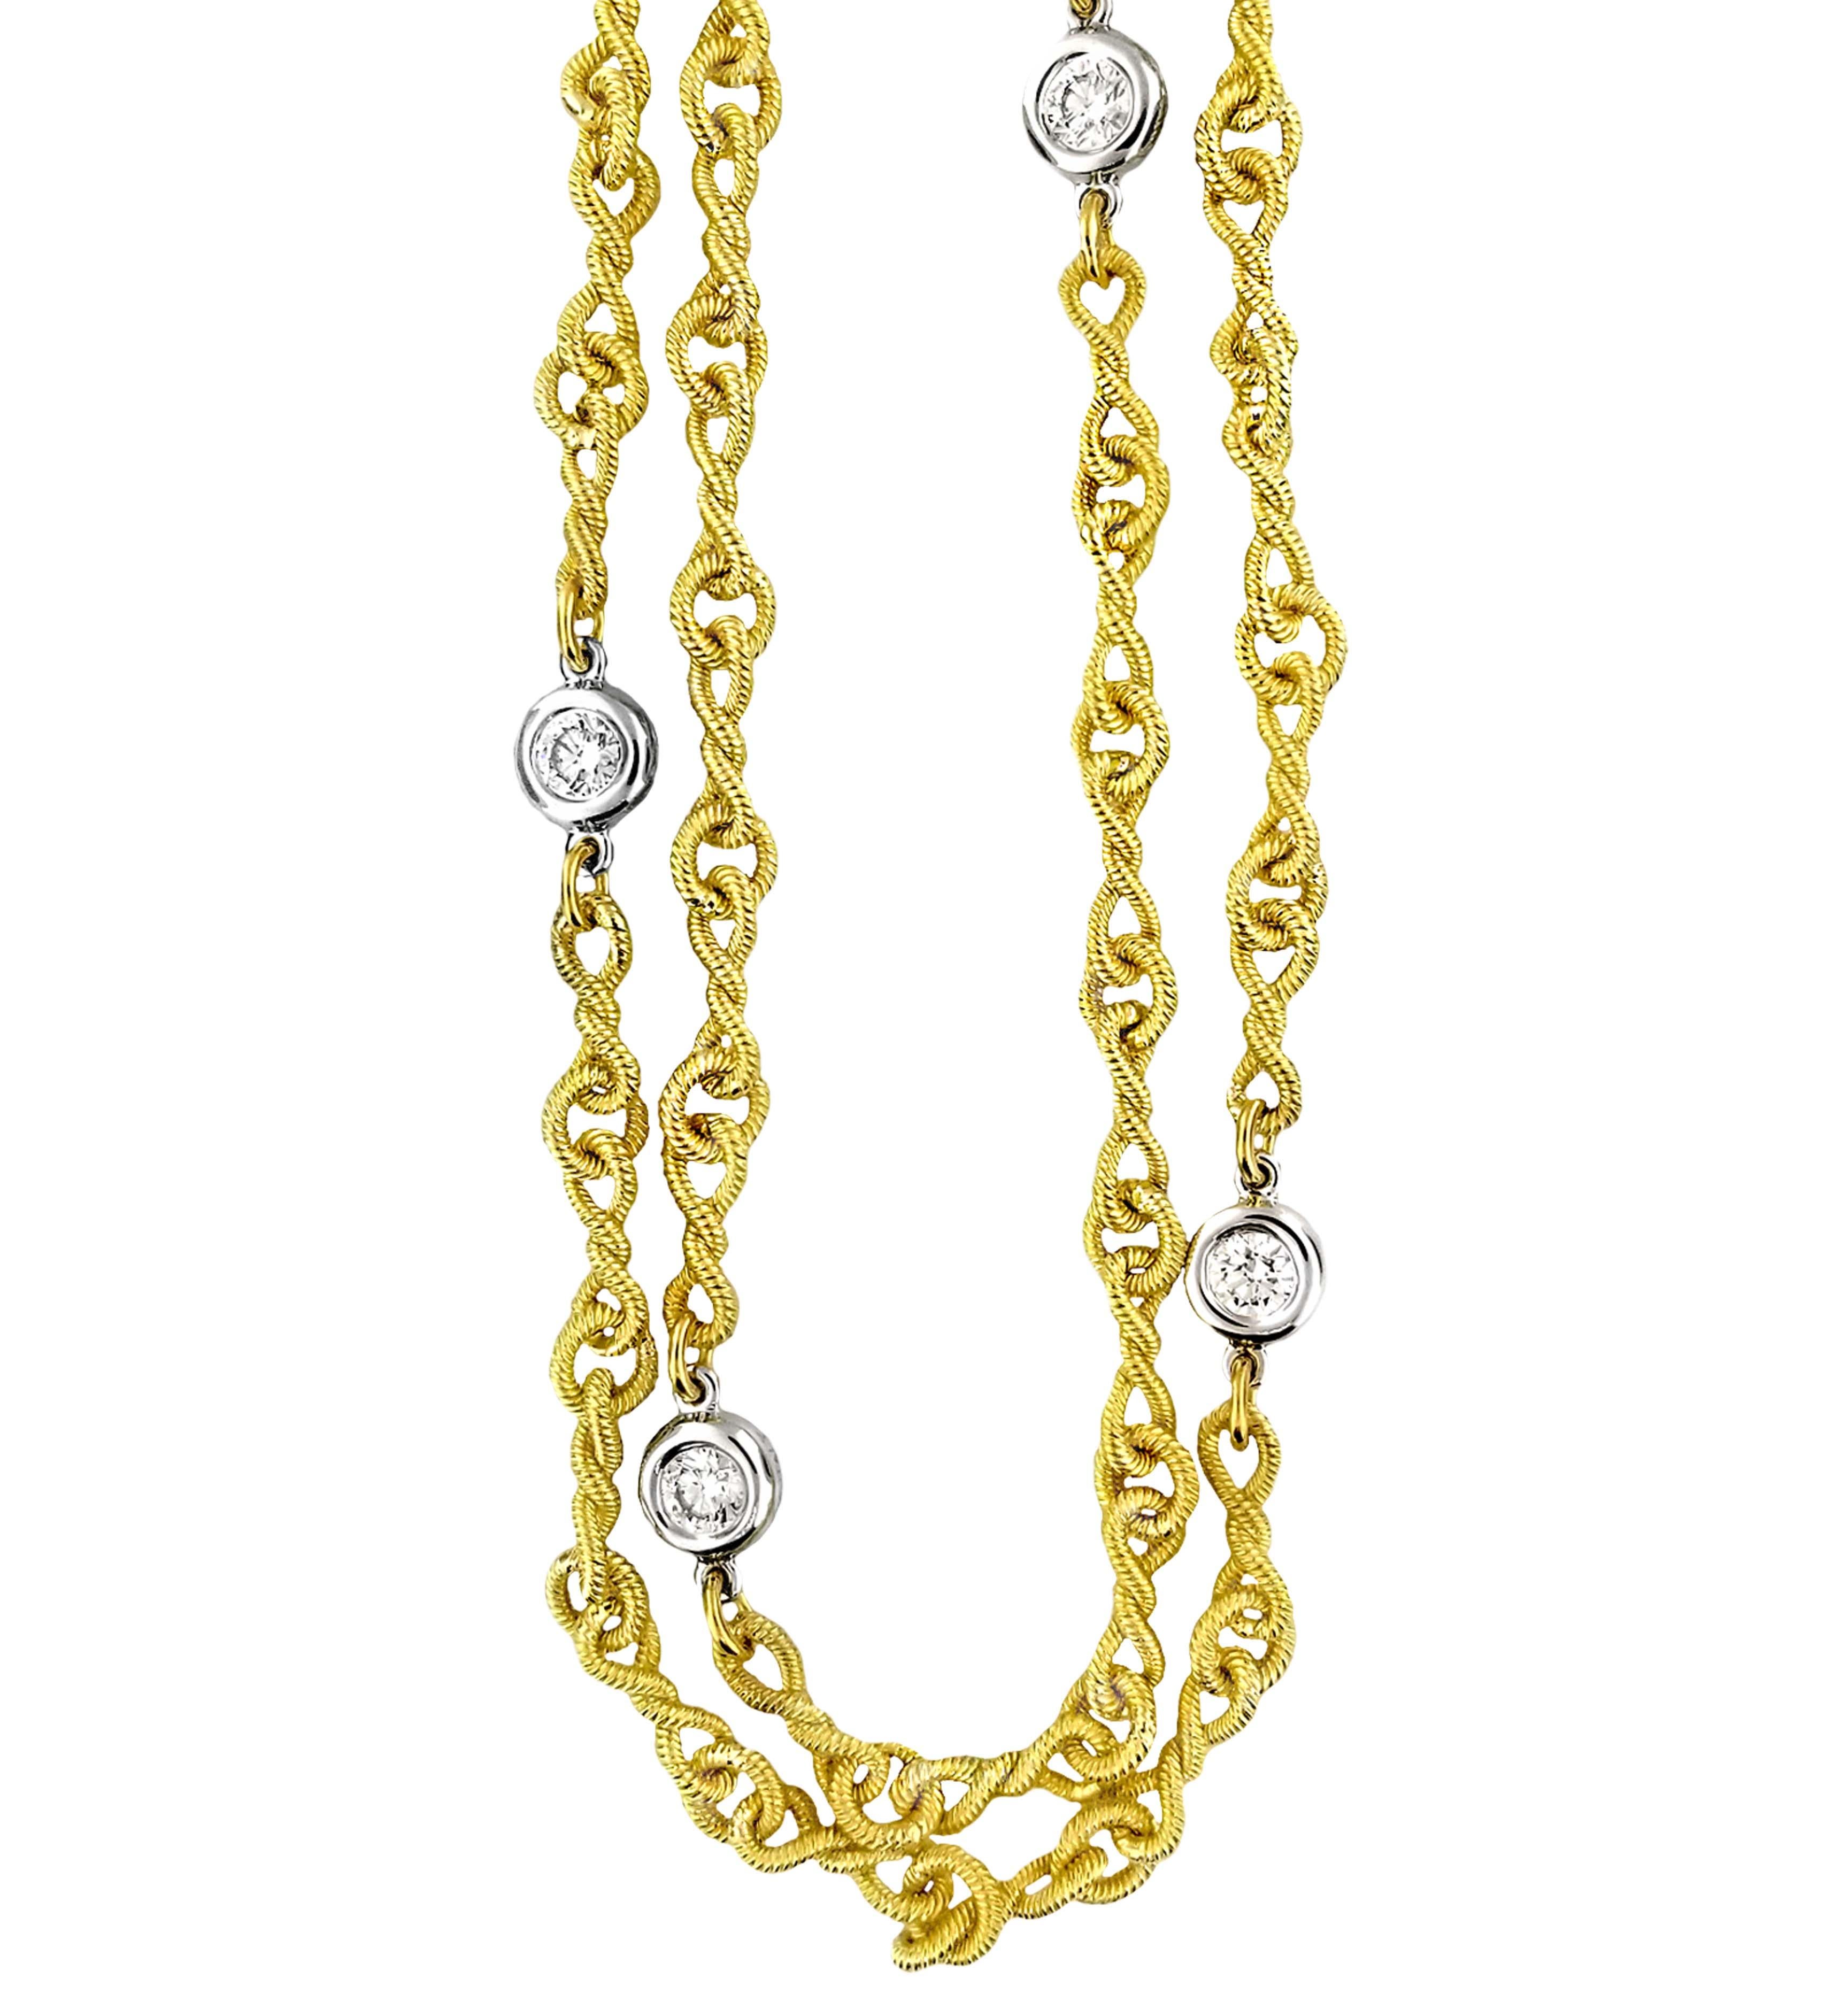 Produced by award winning Italian designer Stefano Vitolo. Stefano creates custom artisanal one of a kind jewelry with excellent gemstones in a truly old world Italian craftmanship.
This handcrafted necklace have 0.88 total carat weight of F/G